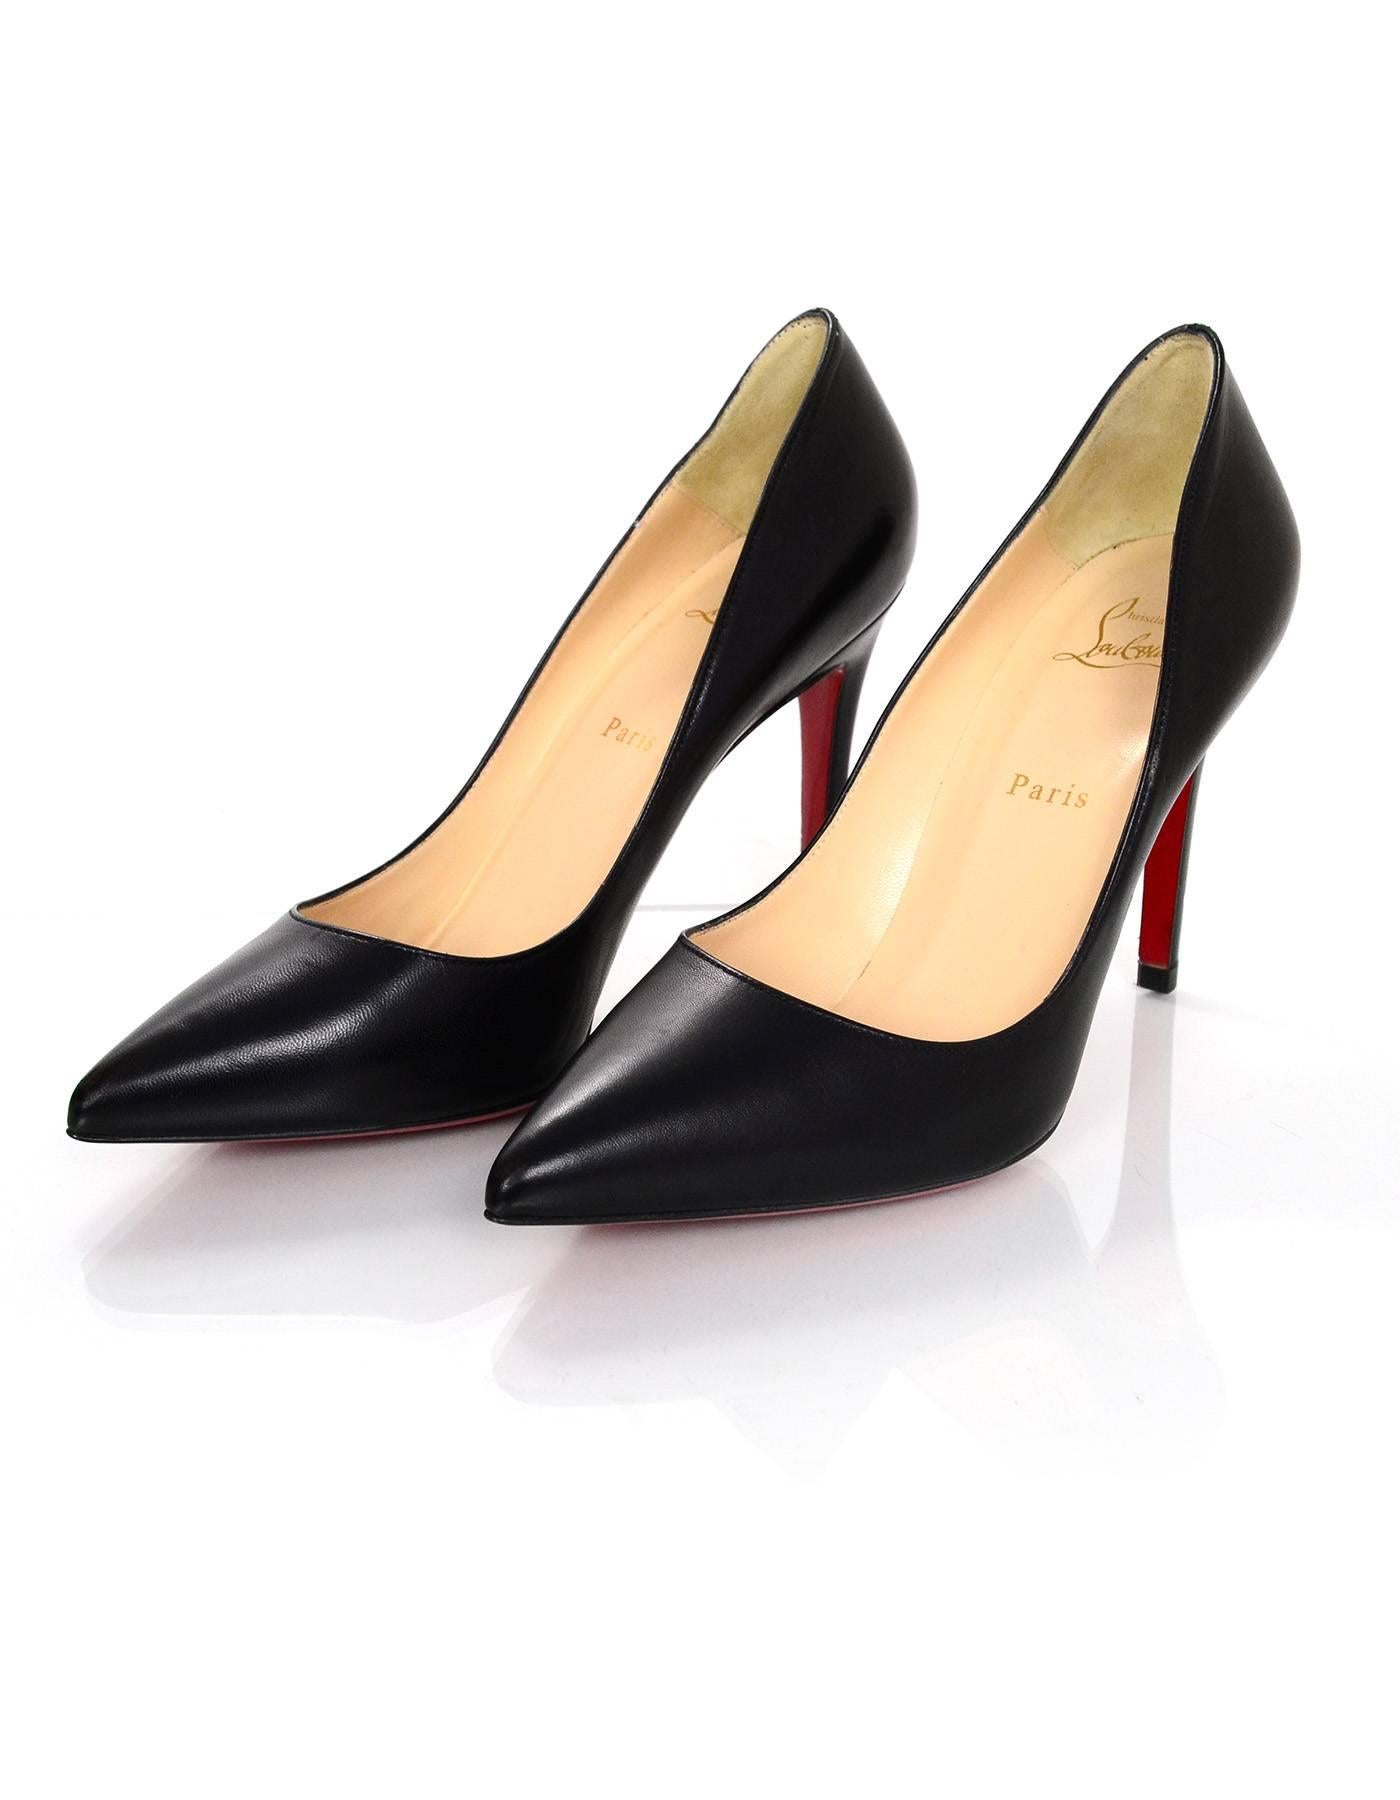 Christian Louboutin Black Leather Pigalle 100mm Pumps Sz 40.5

Made In: Italy
Color: Black
Materials: Leather
Closure/Opening: Slide on
Sole Stamp: Christian Louboutin Made in Italy 40.5
Retail Price: $675 + tax
Overall Condition: Excellent